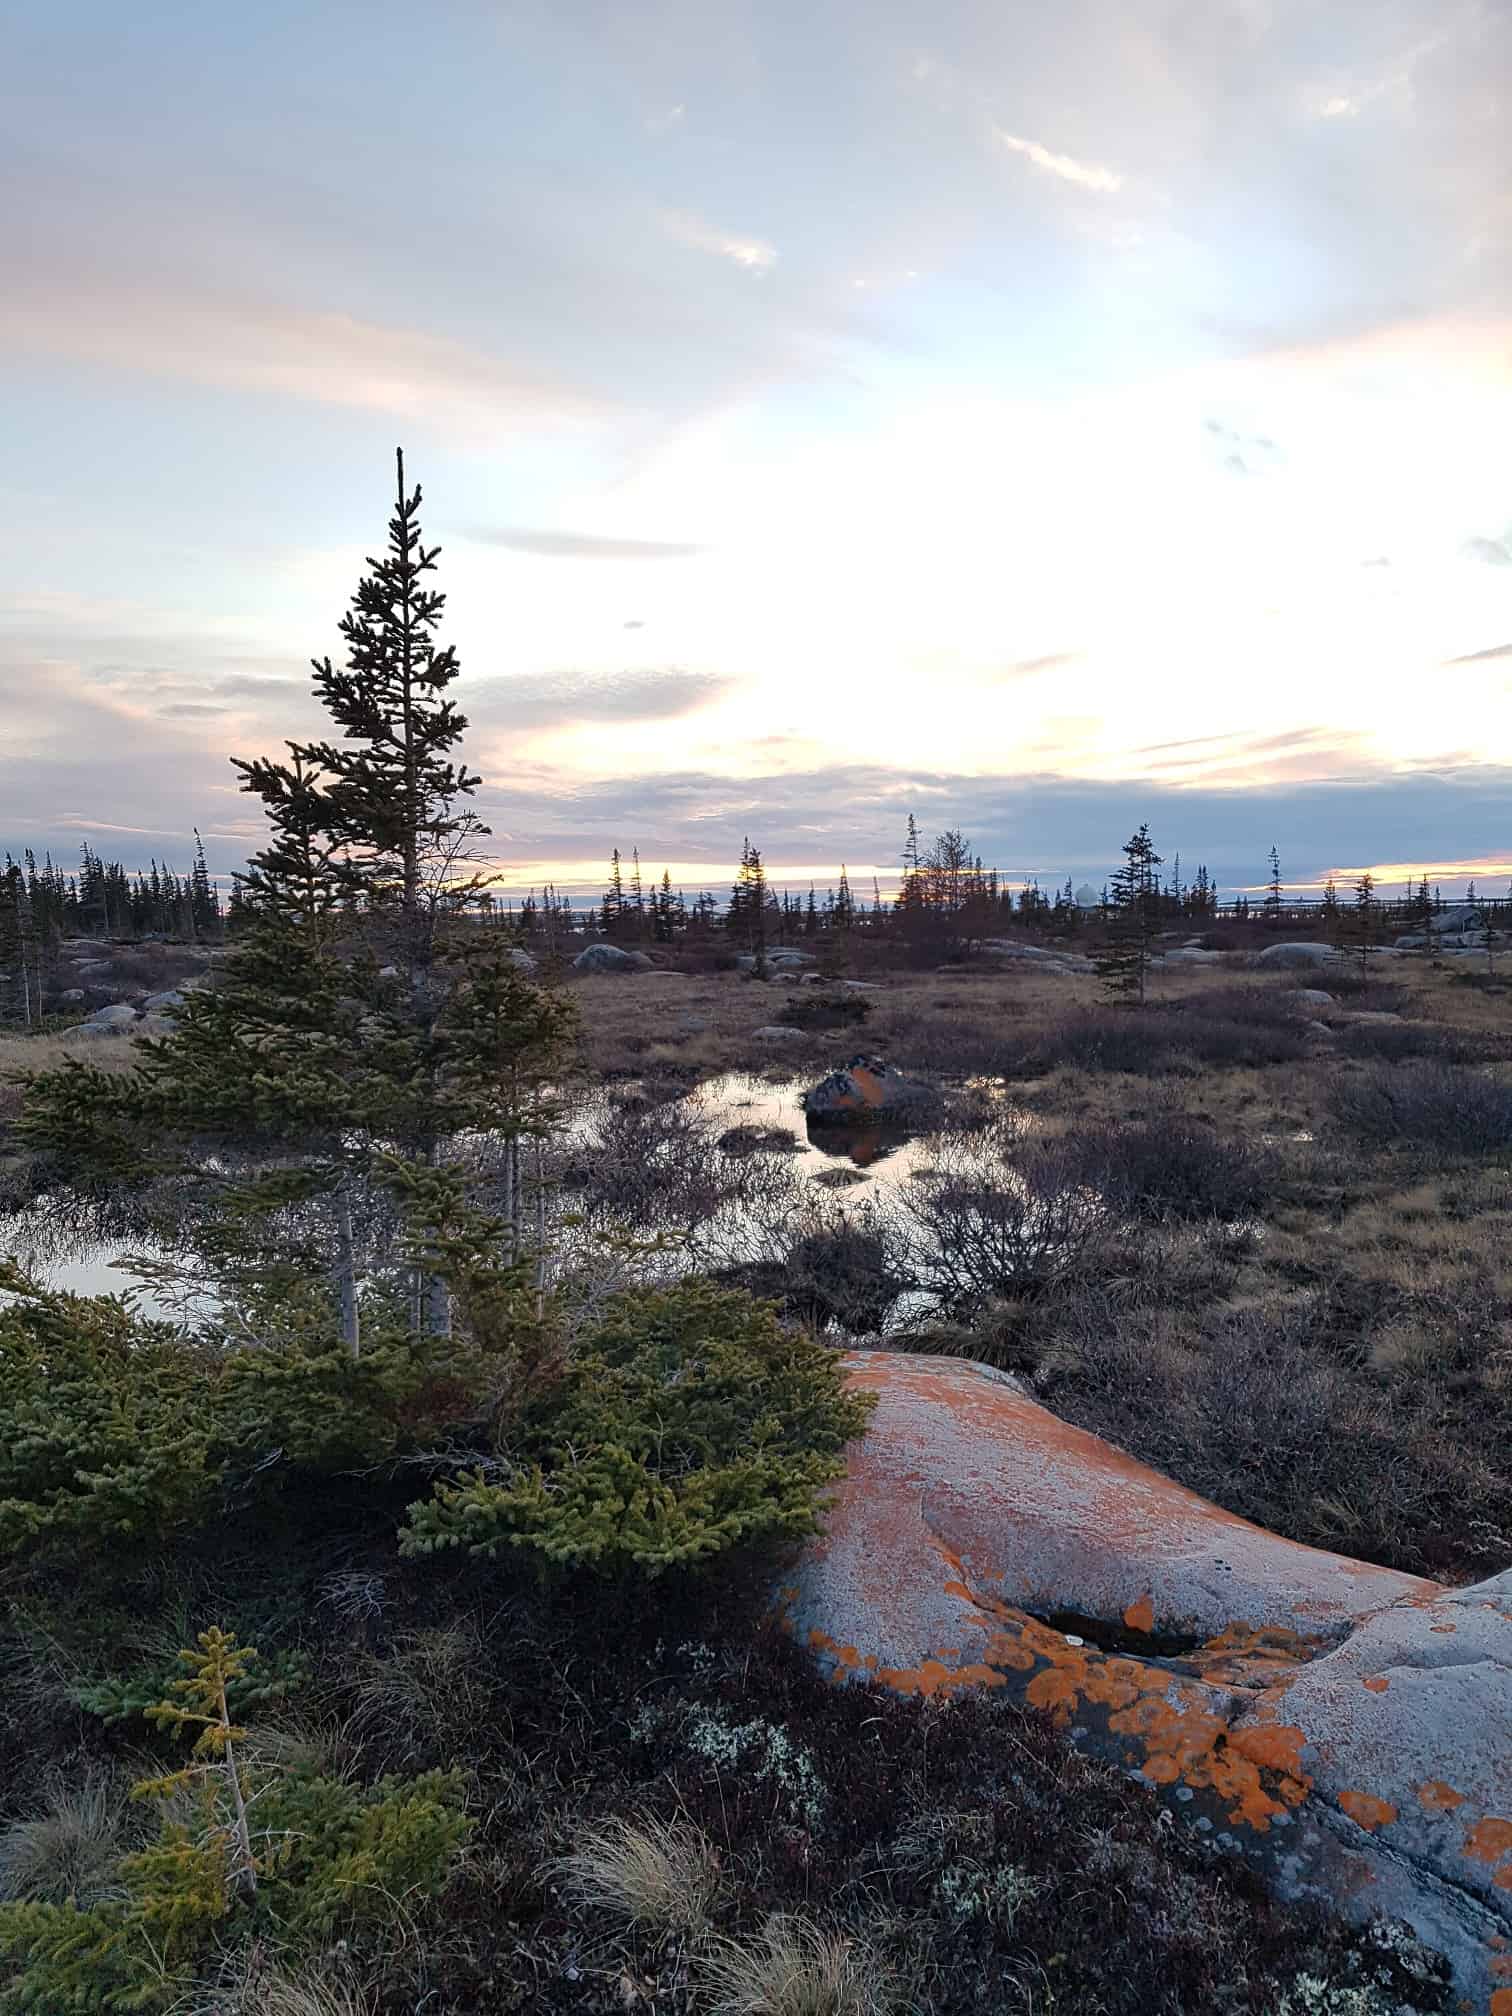 A spruce tree in the Hudson bay lowlands after spring snow melt